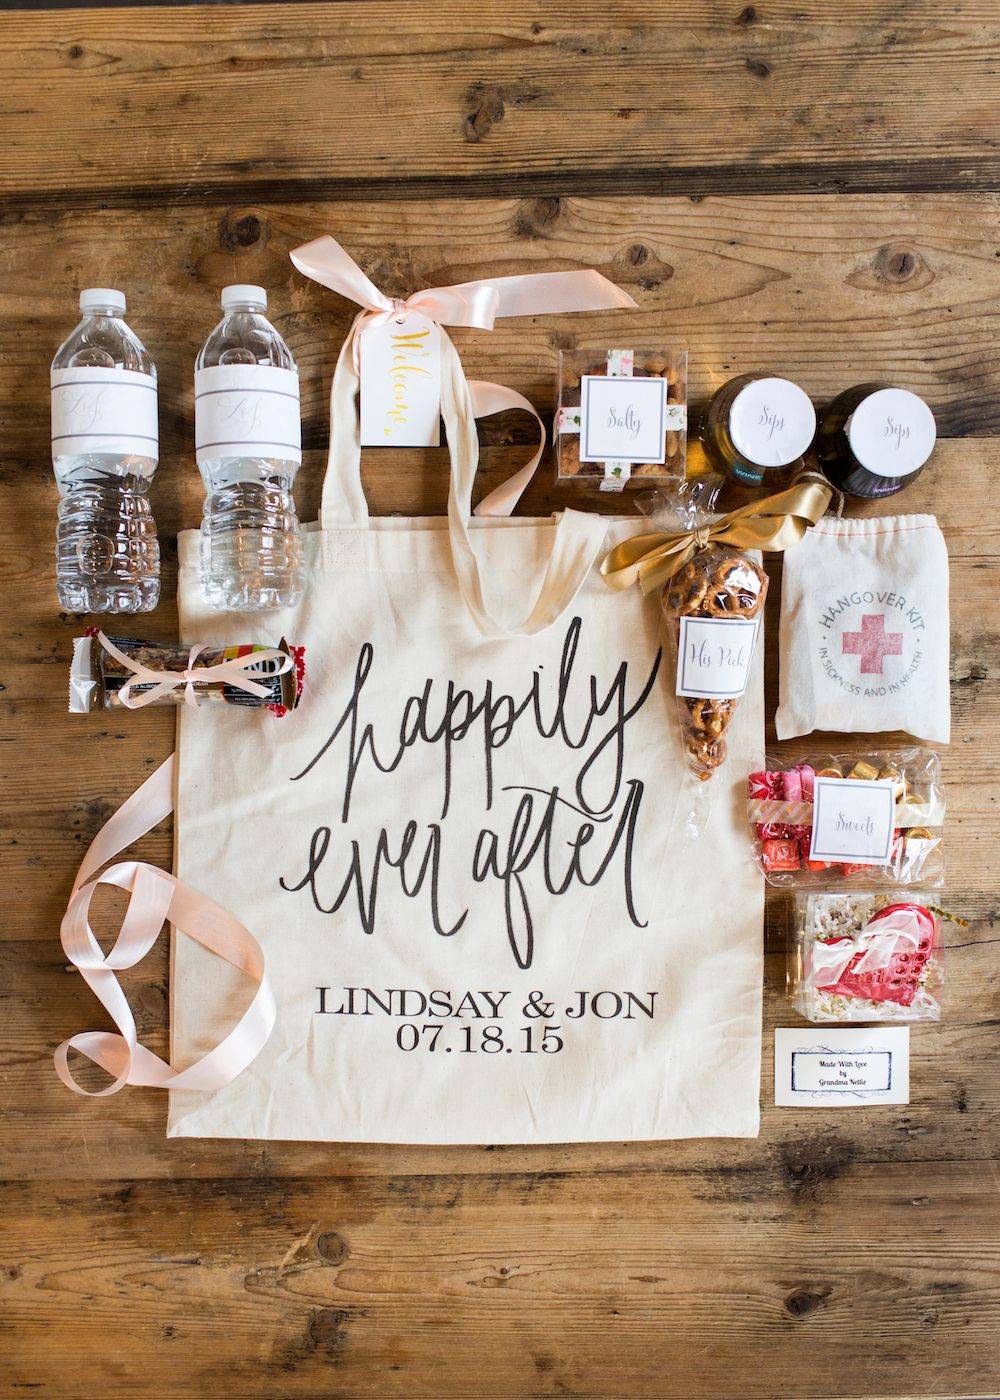 Wedding Guest Gift Bag Ideas
 Wedding Wednesday What We Put in Our Wedding Wel e Bags